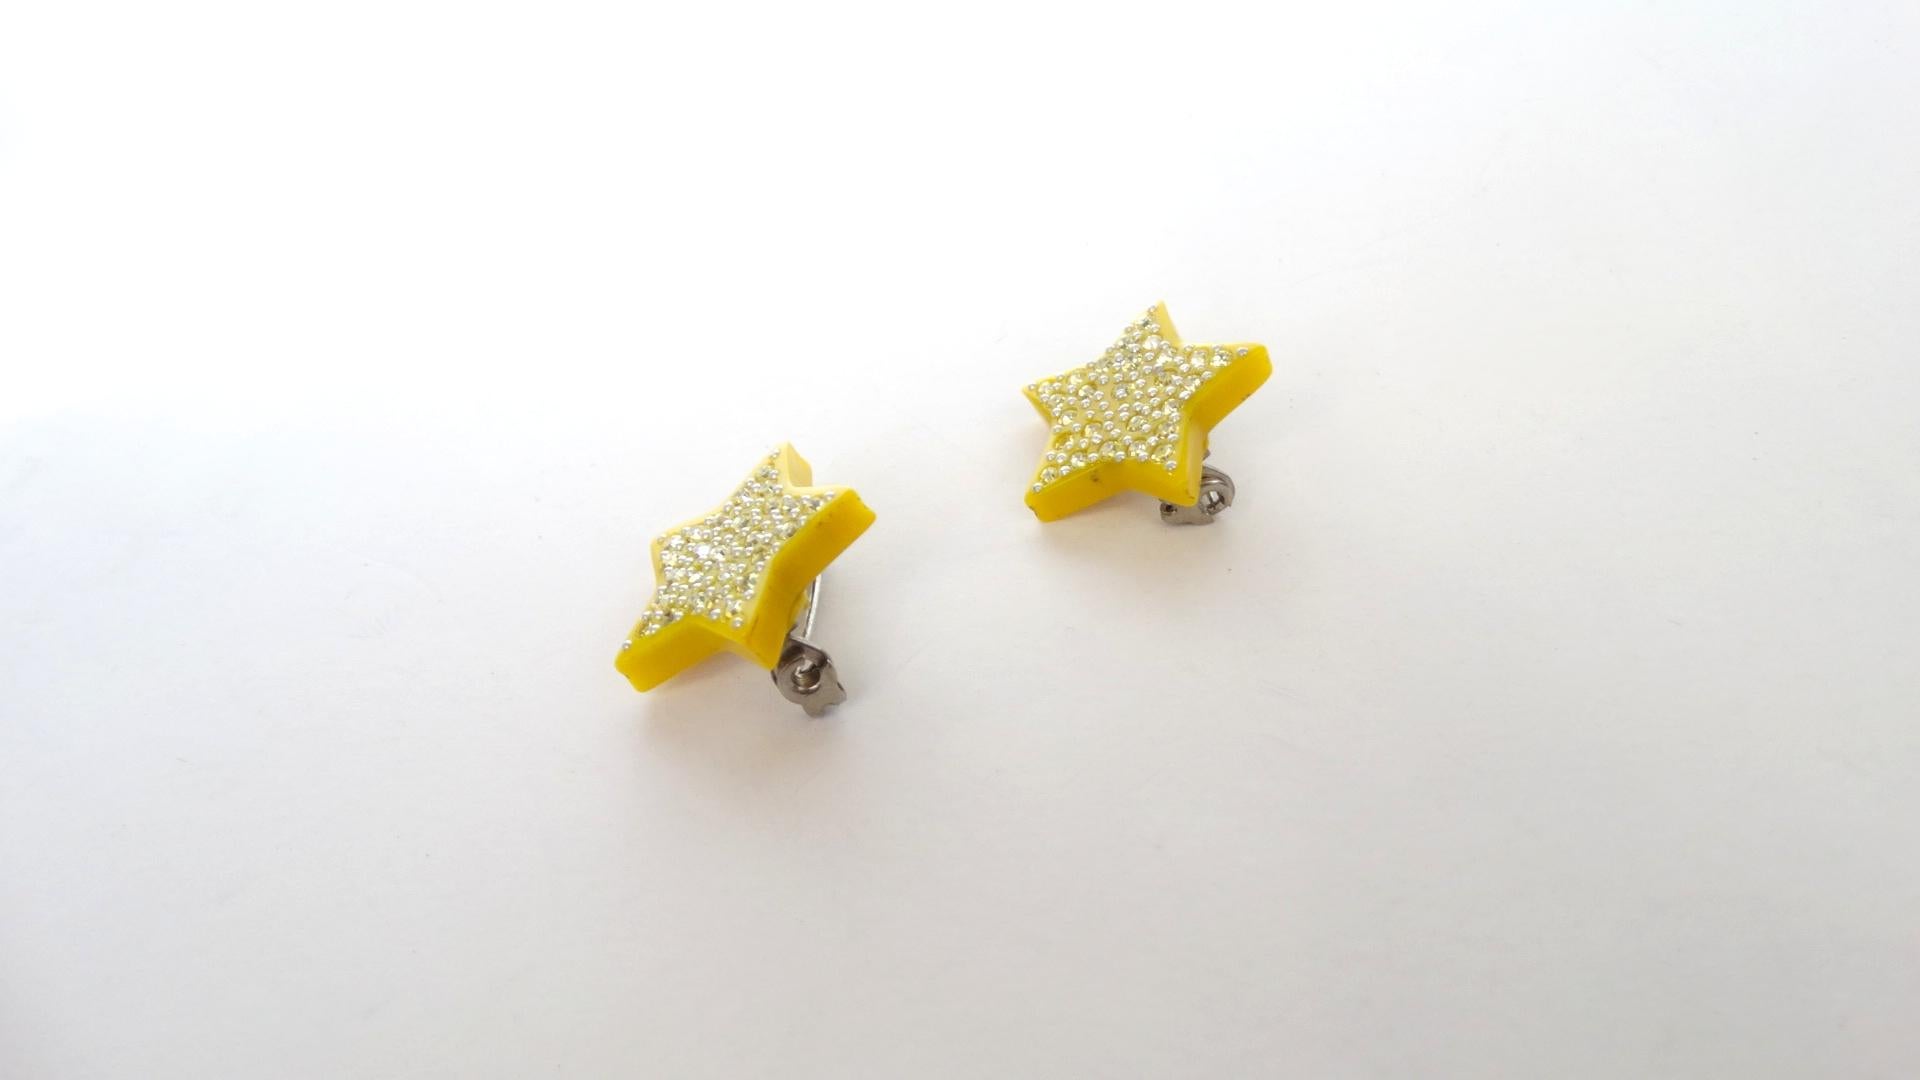 Brooches Are The New Hot Accessory This Season And We've Got You Covered! Circa 1970's, these Lea Stein mini star pins are sure to keep you starstruck with their bright yellow color and jewel encrusted finish. Perfect to wear together or separate,